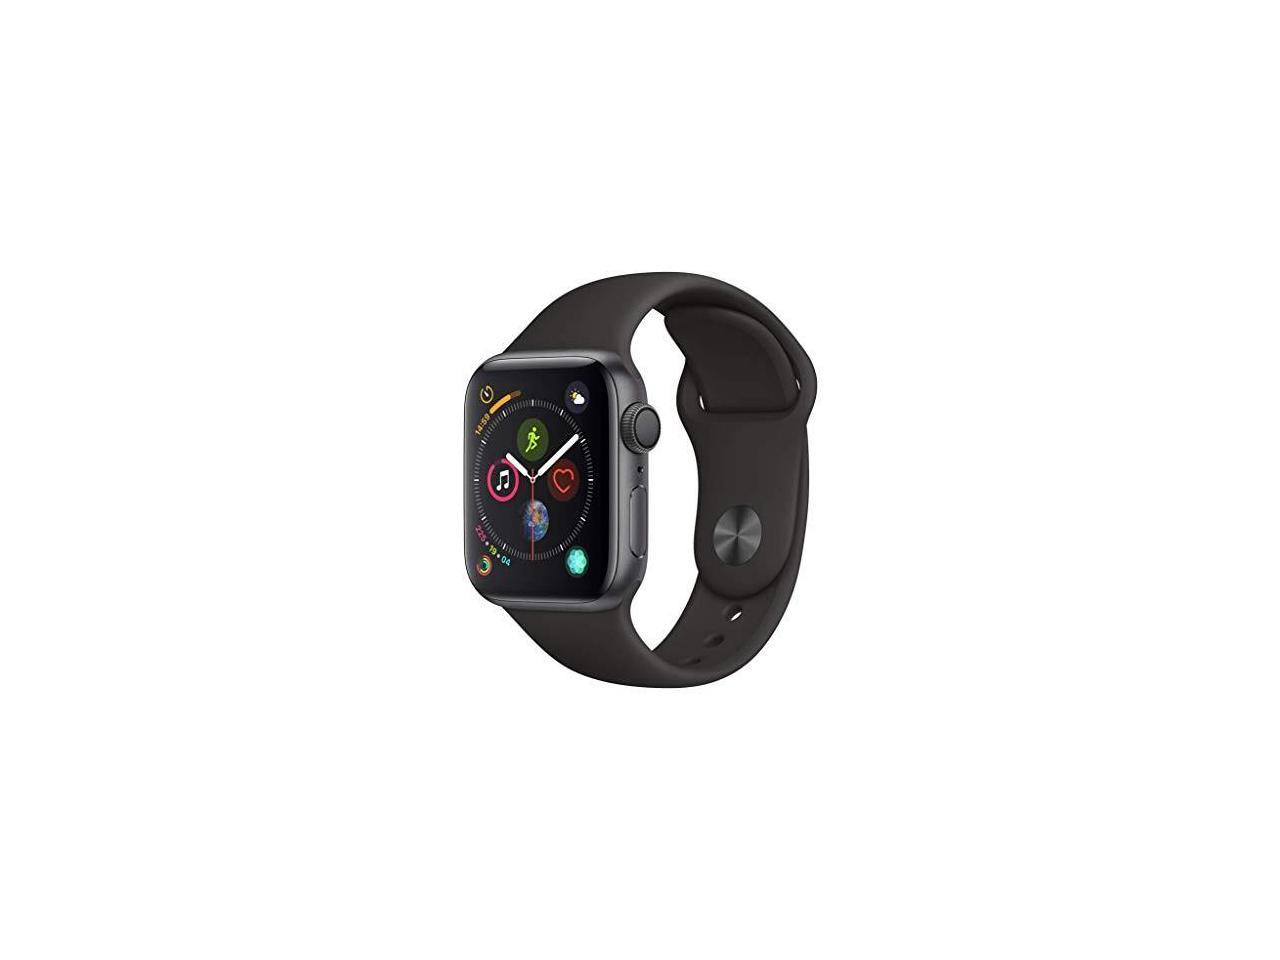 Used - Good: Apple Watch Series 4 GPS, 40mm Space Gray Aluminum 